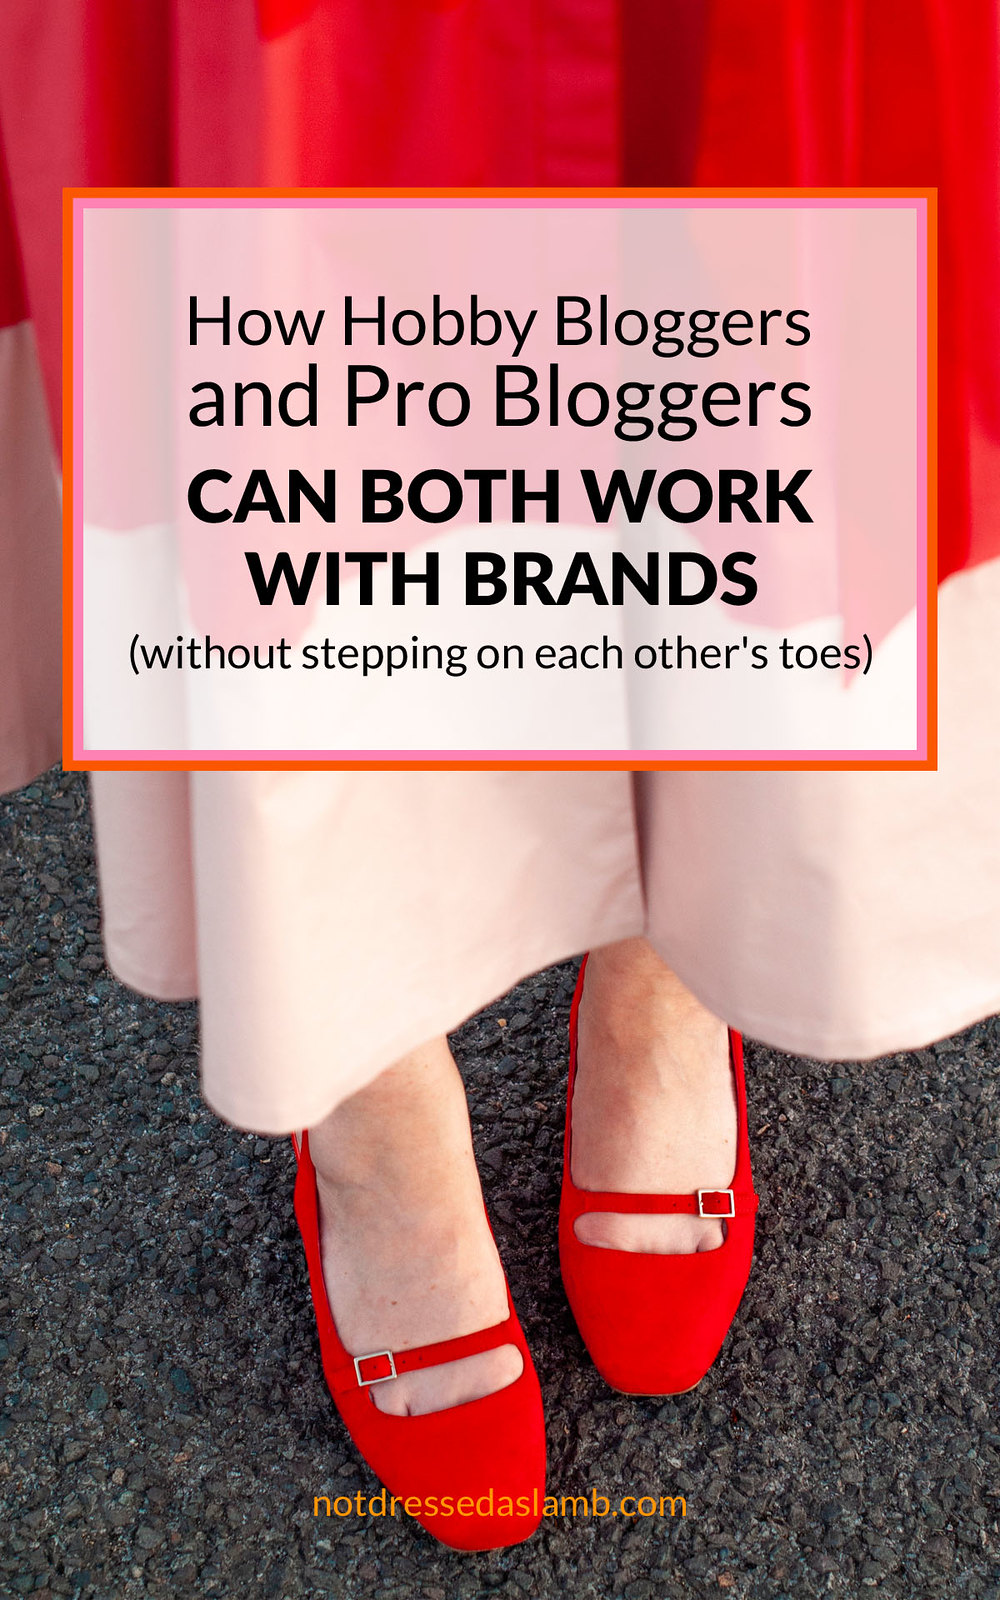 How Hobby Bloggers and Pro Bloggers Can Both Work With Brands (Without Stepping On Each Other's Toes) | Not Dressed As Lamb